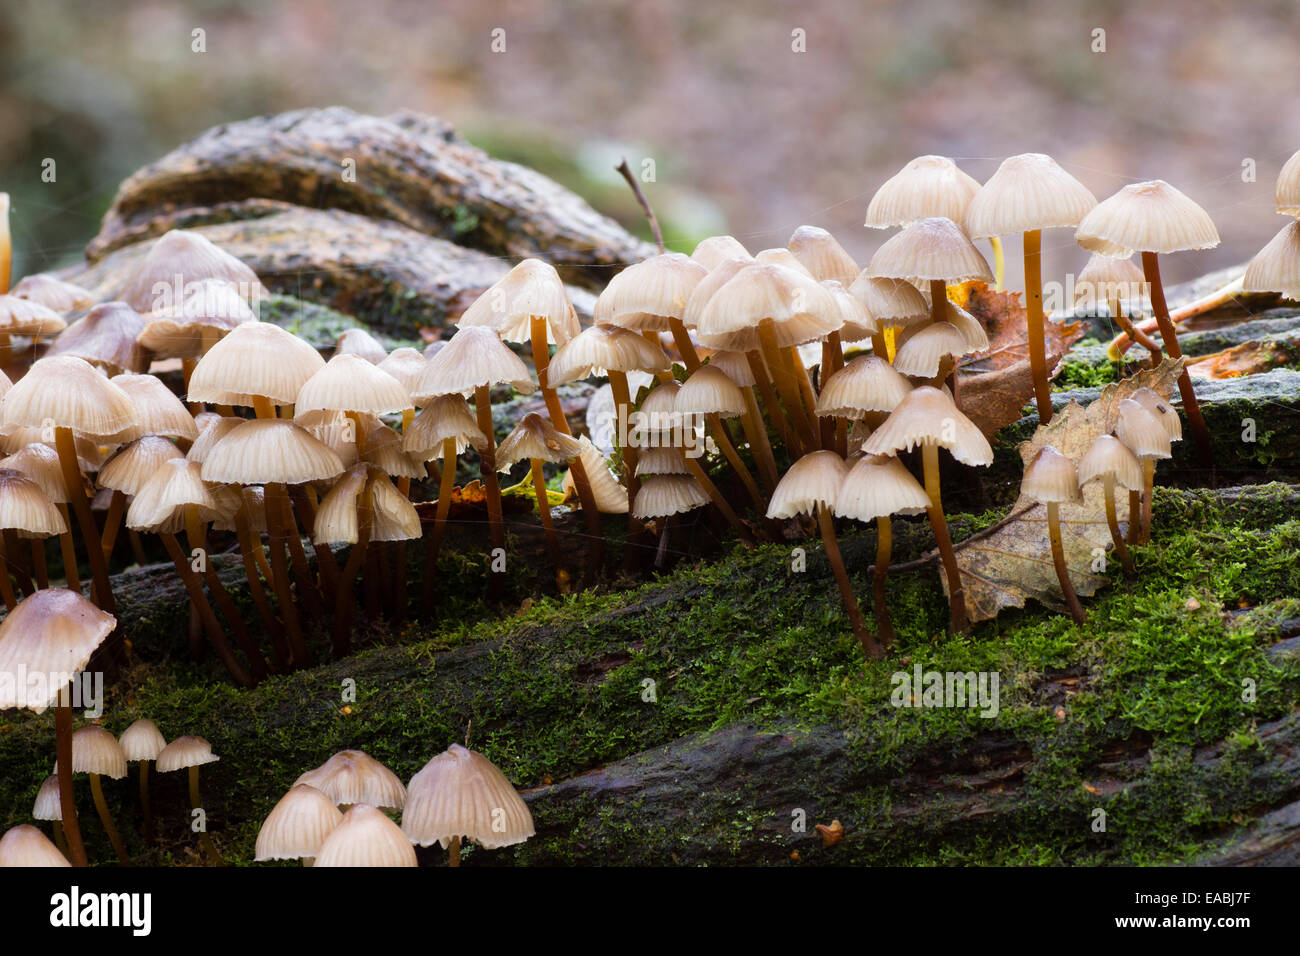 fruiting-mushrooms-of-the-clustered-or-o